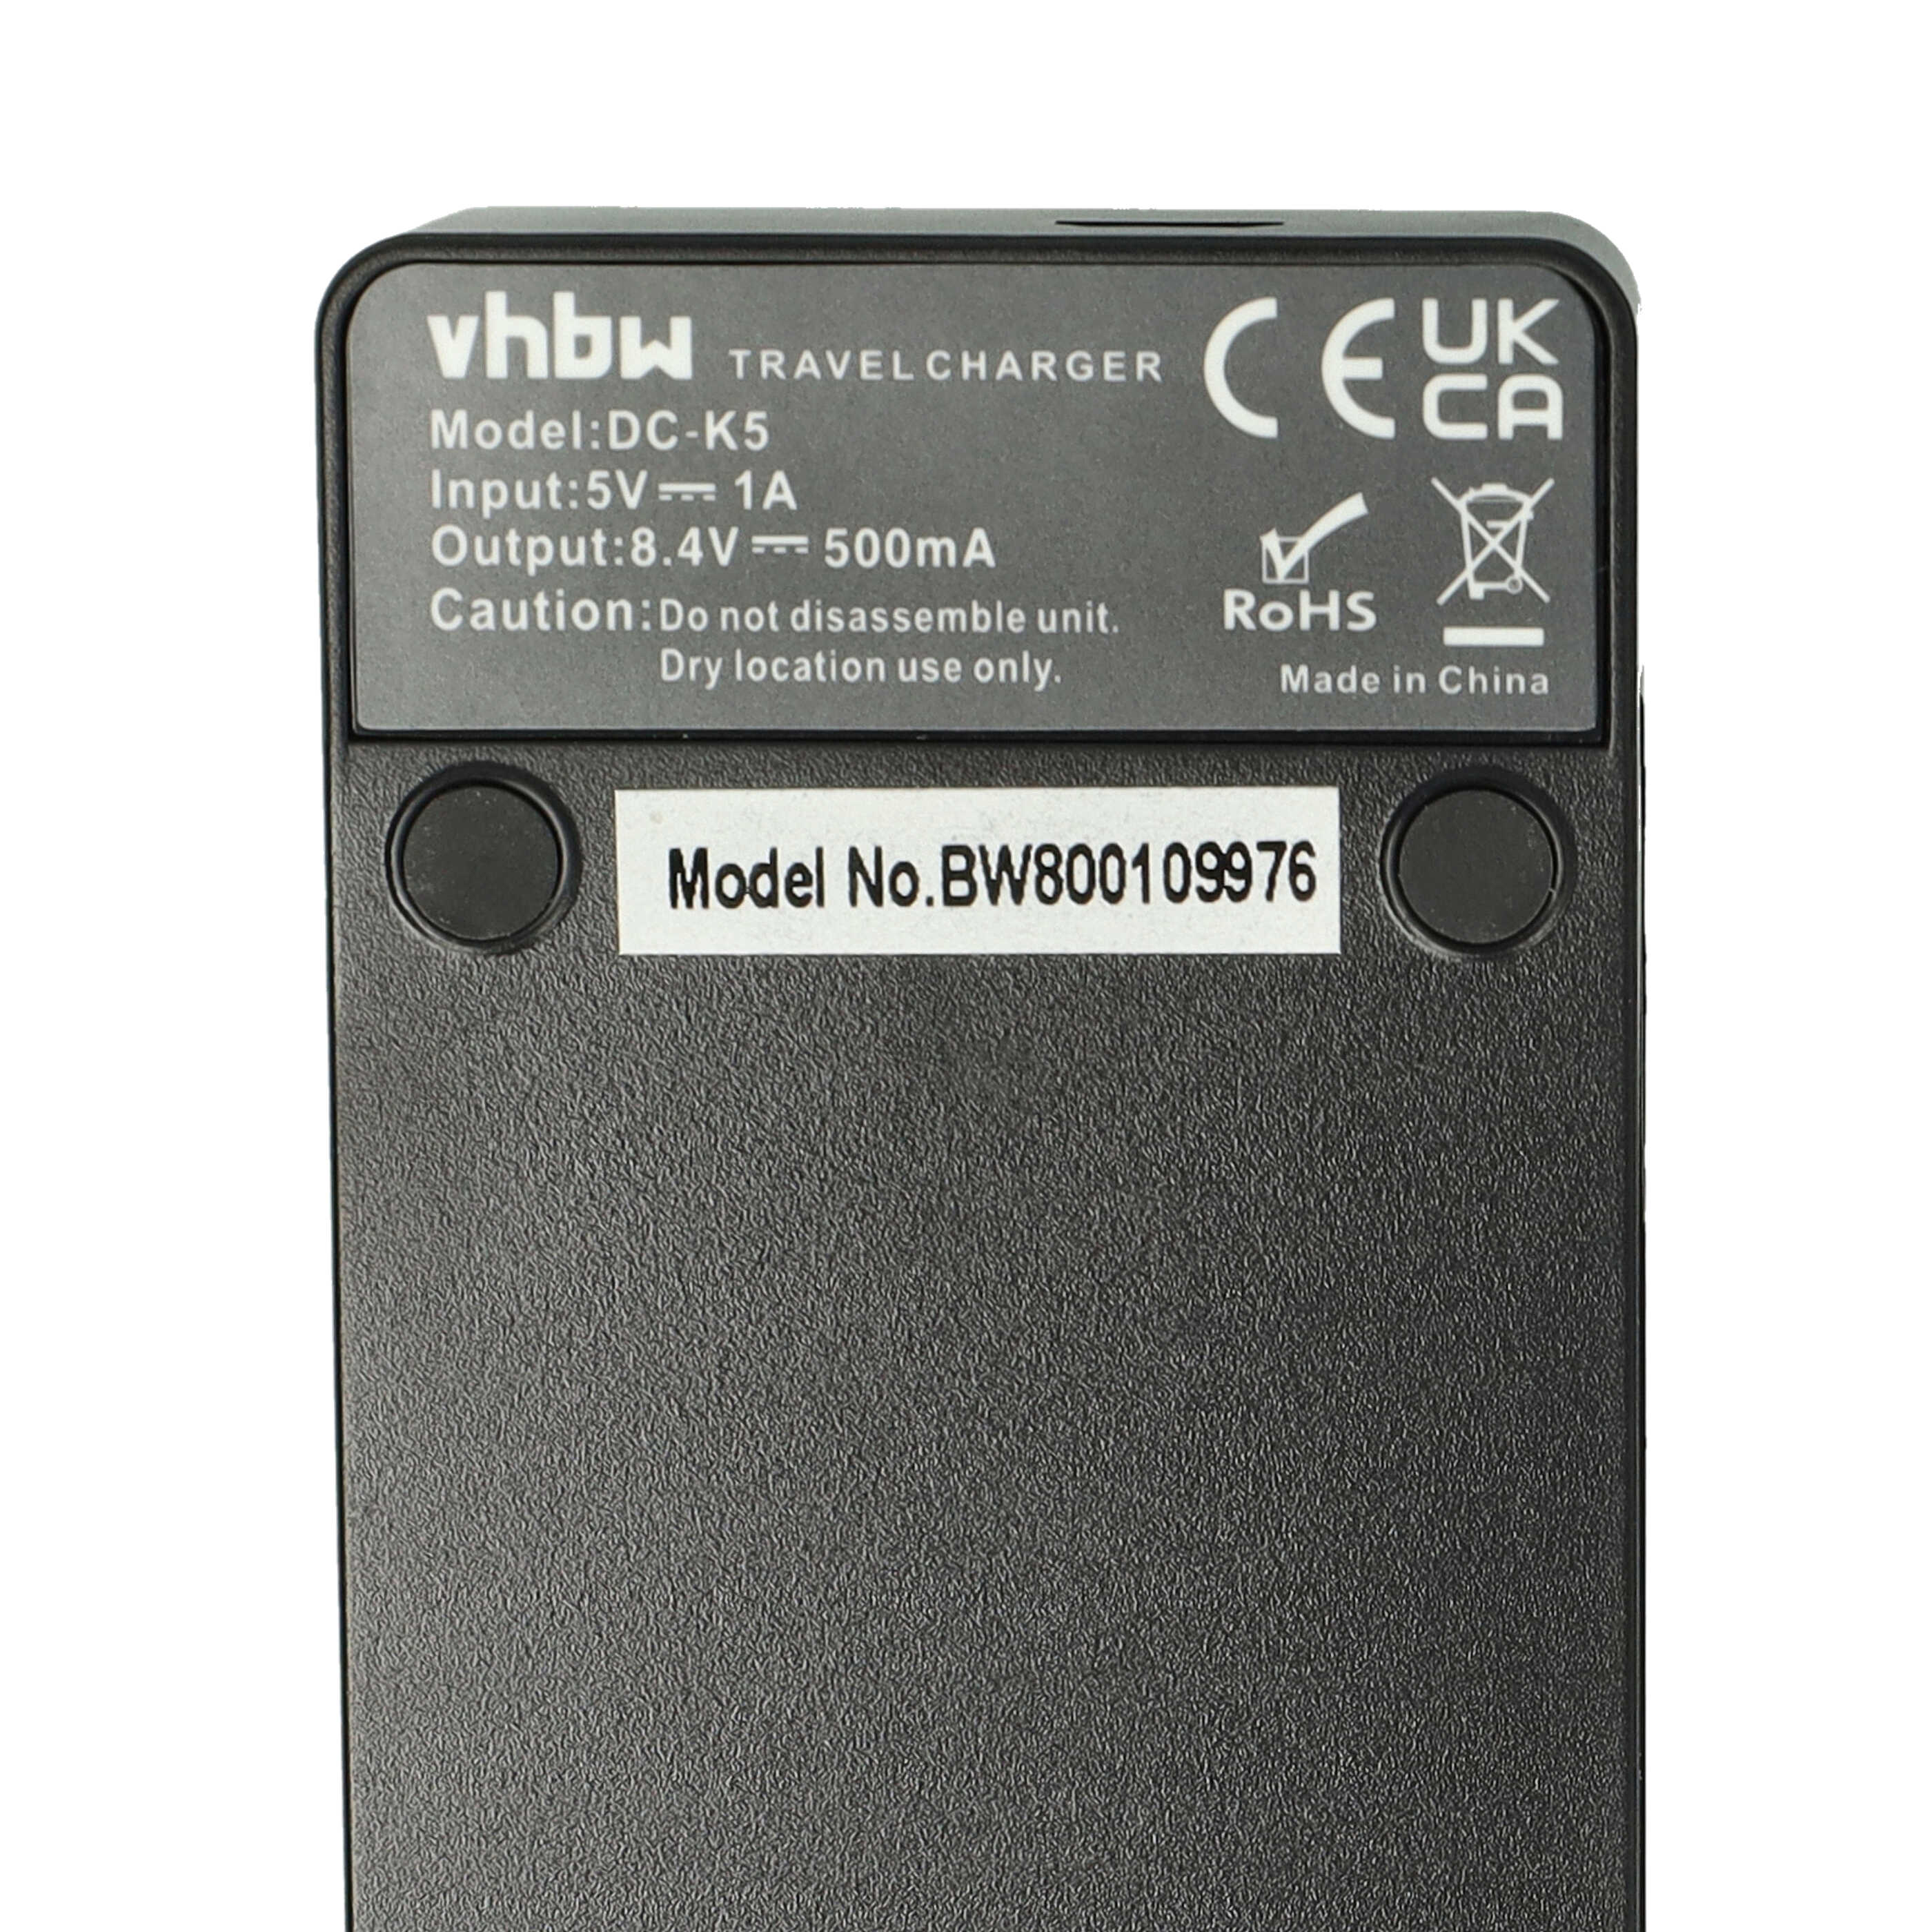 Battery Charger suitable for Canon LP-E8 Camera etc. - 0.5 A, 8.4 V